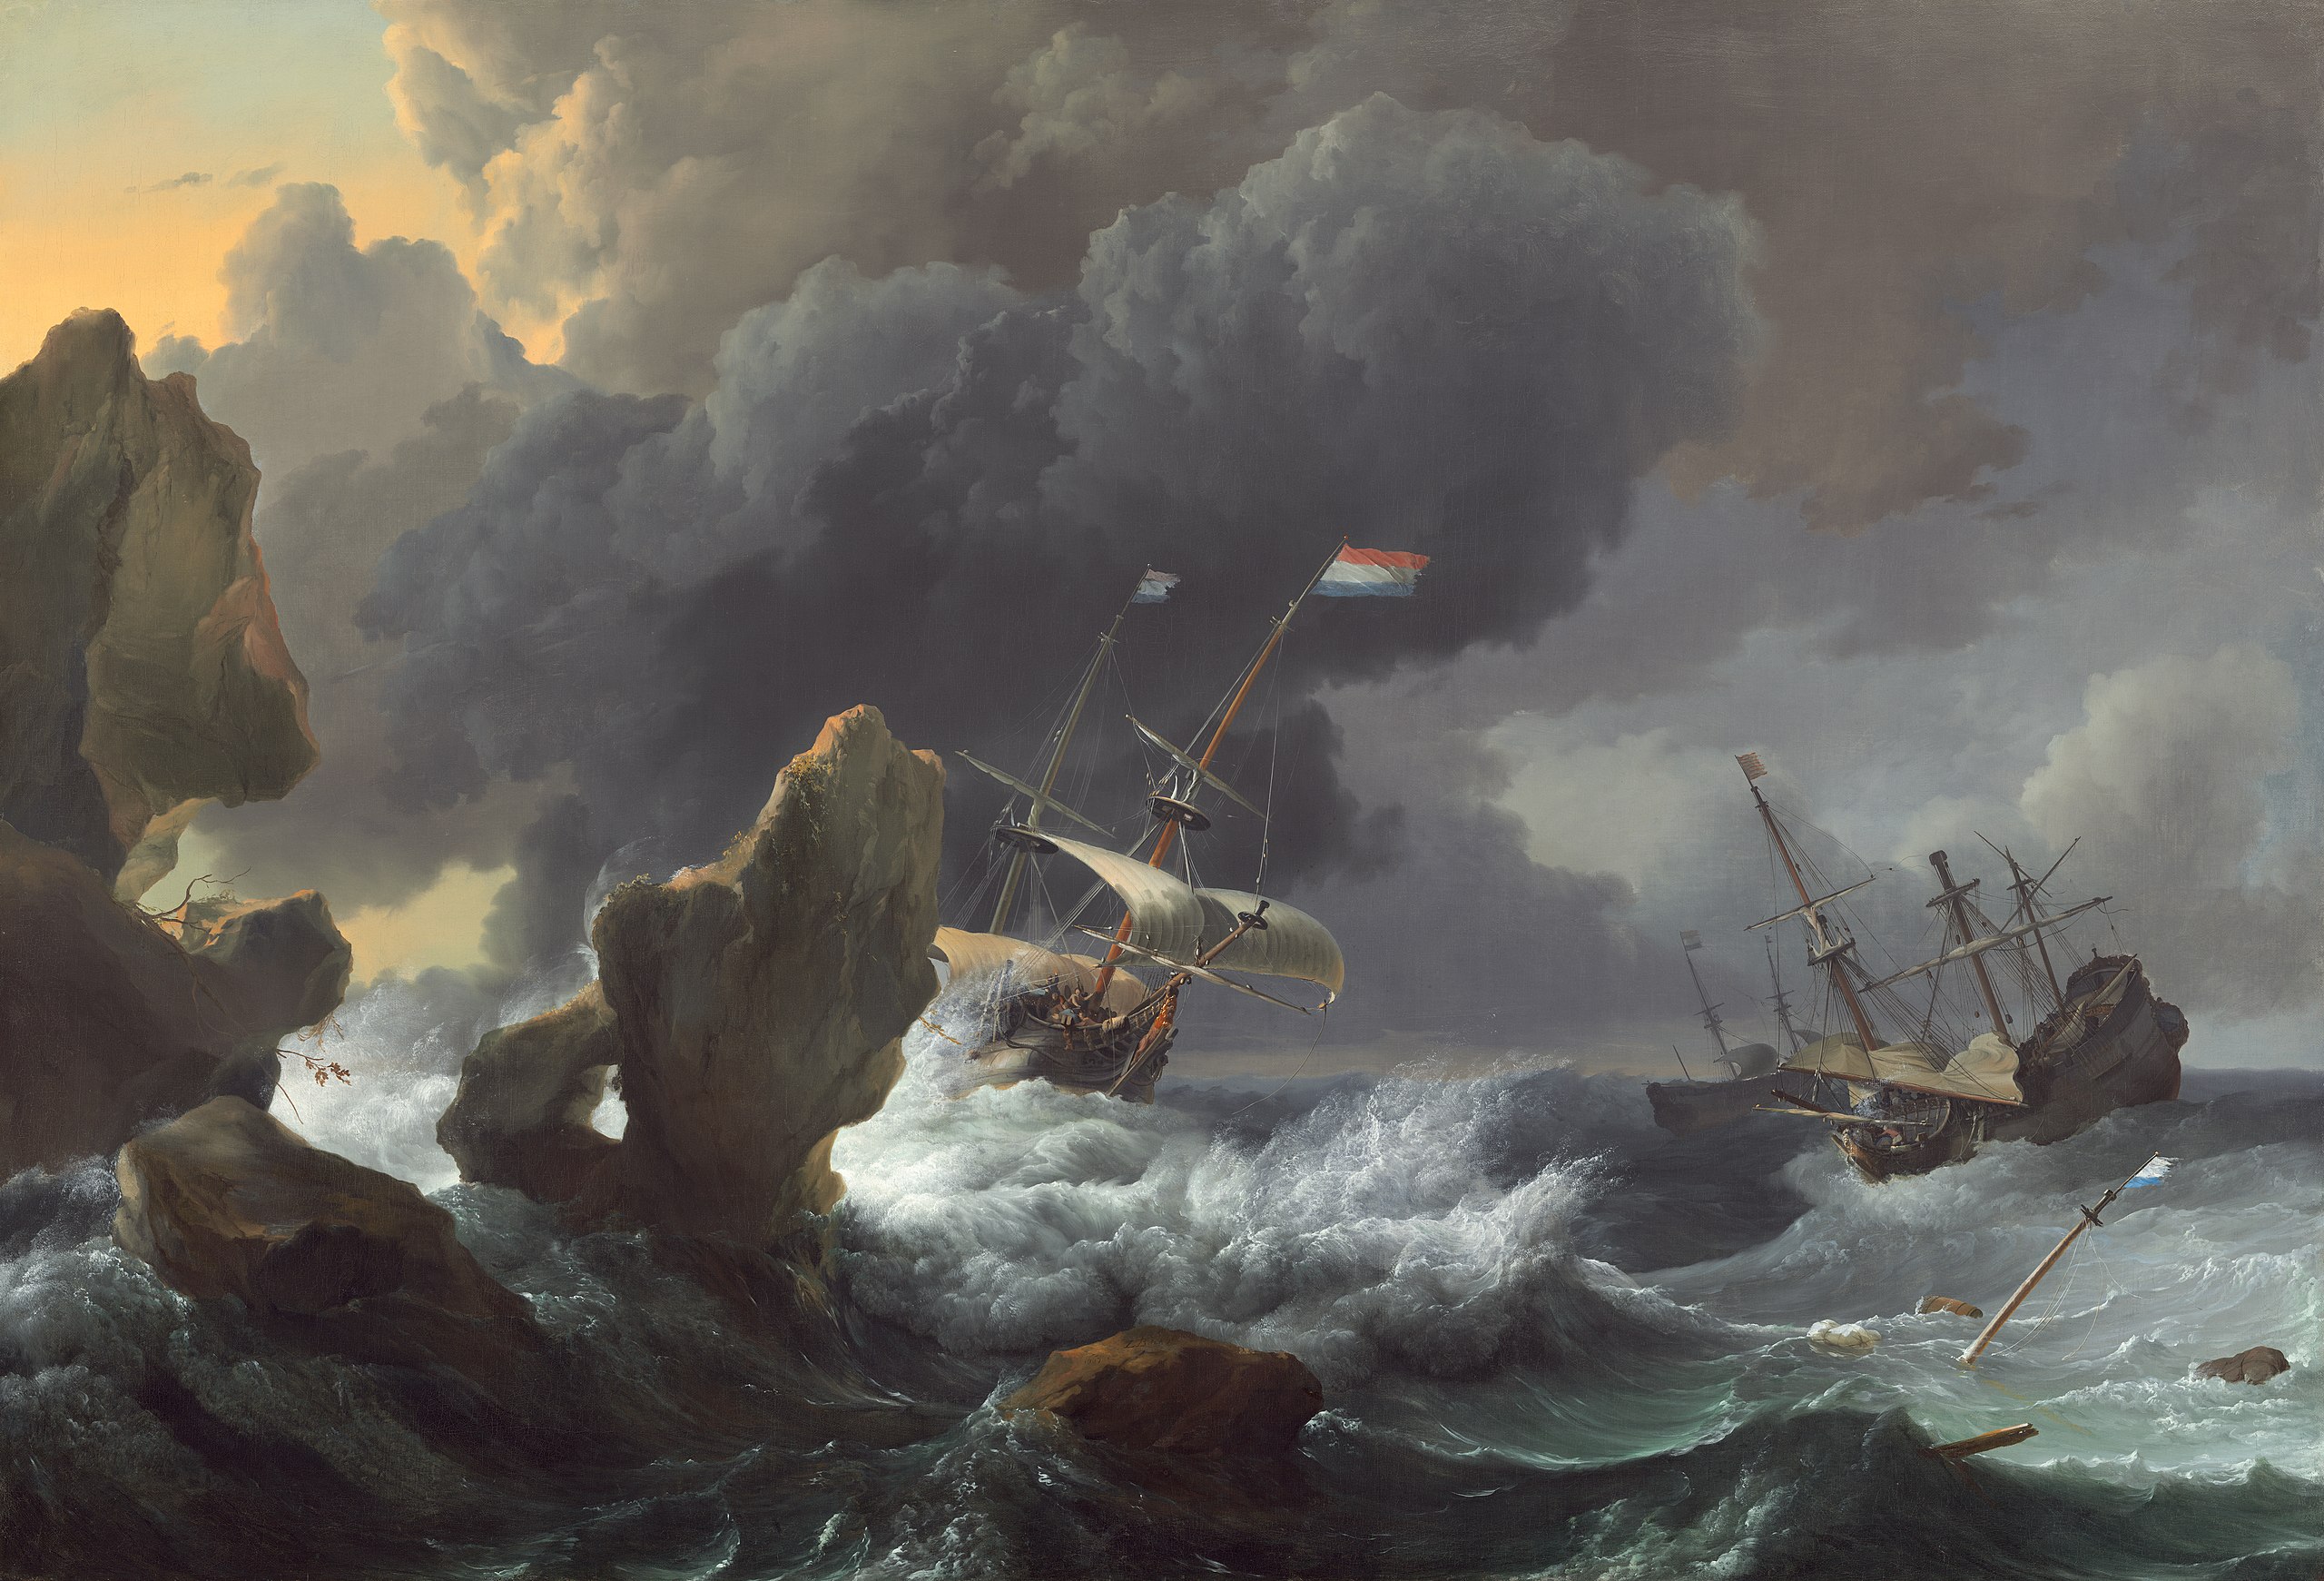 Ships in Distress off a Rocky Coast by Ludolf Backhuysen - 1667 - 114.3 x 167.3 cm National Gallery of Art